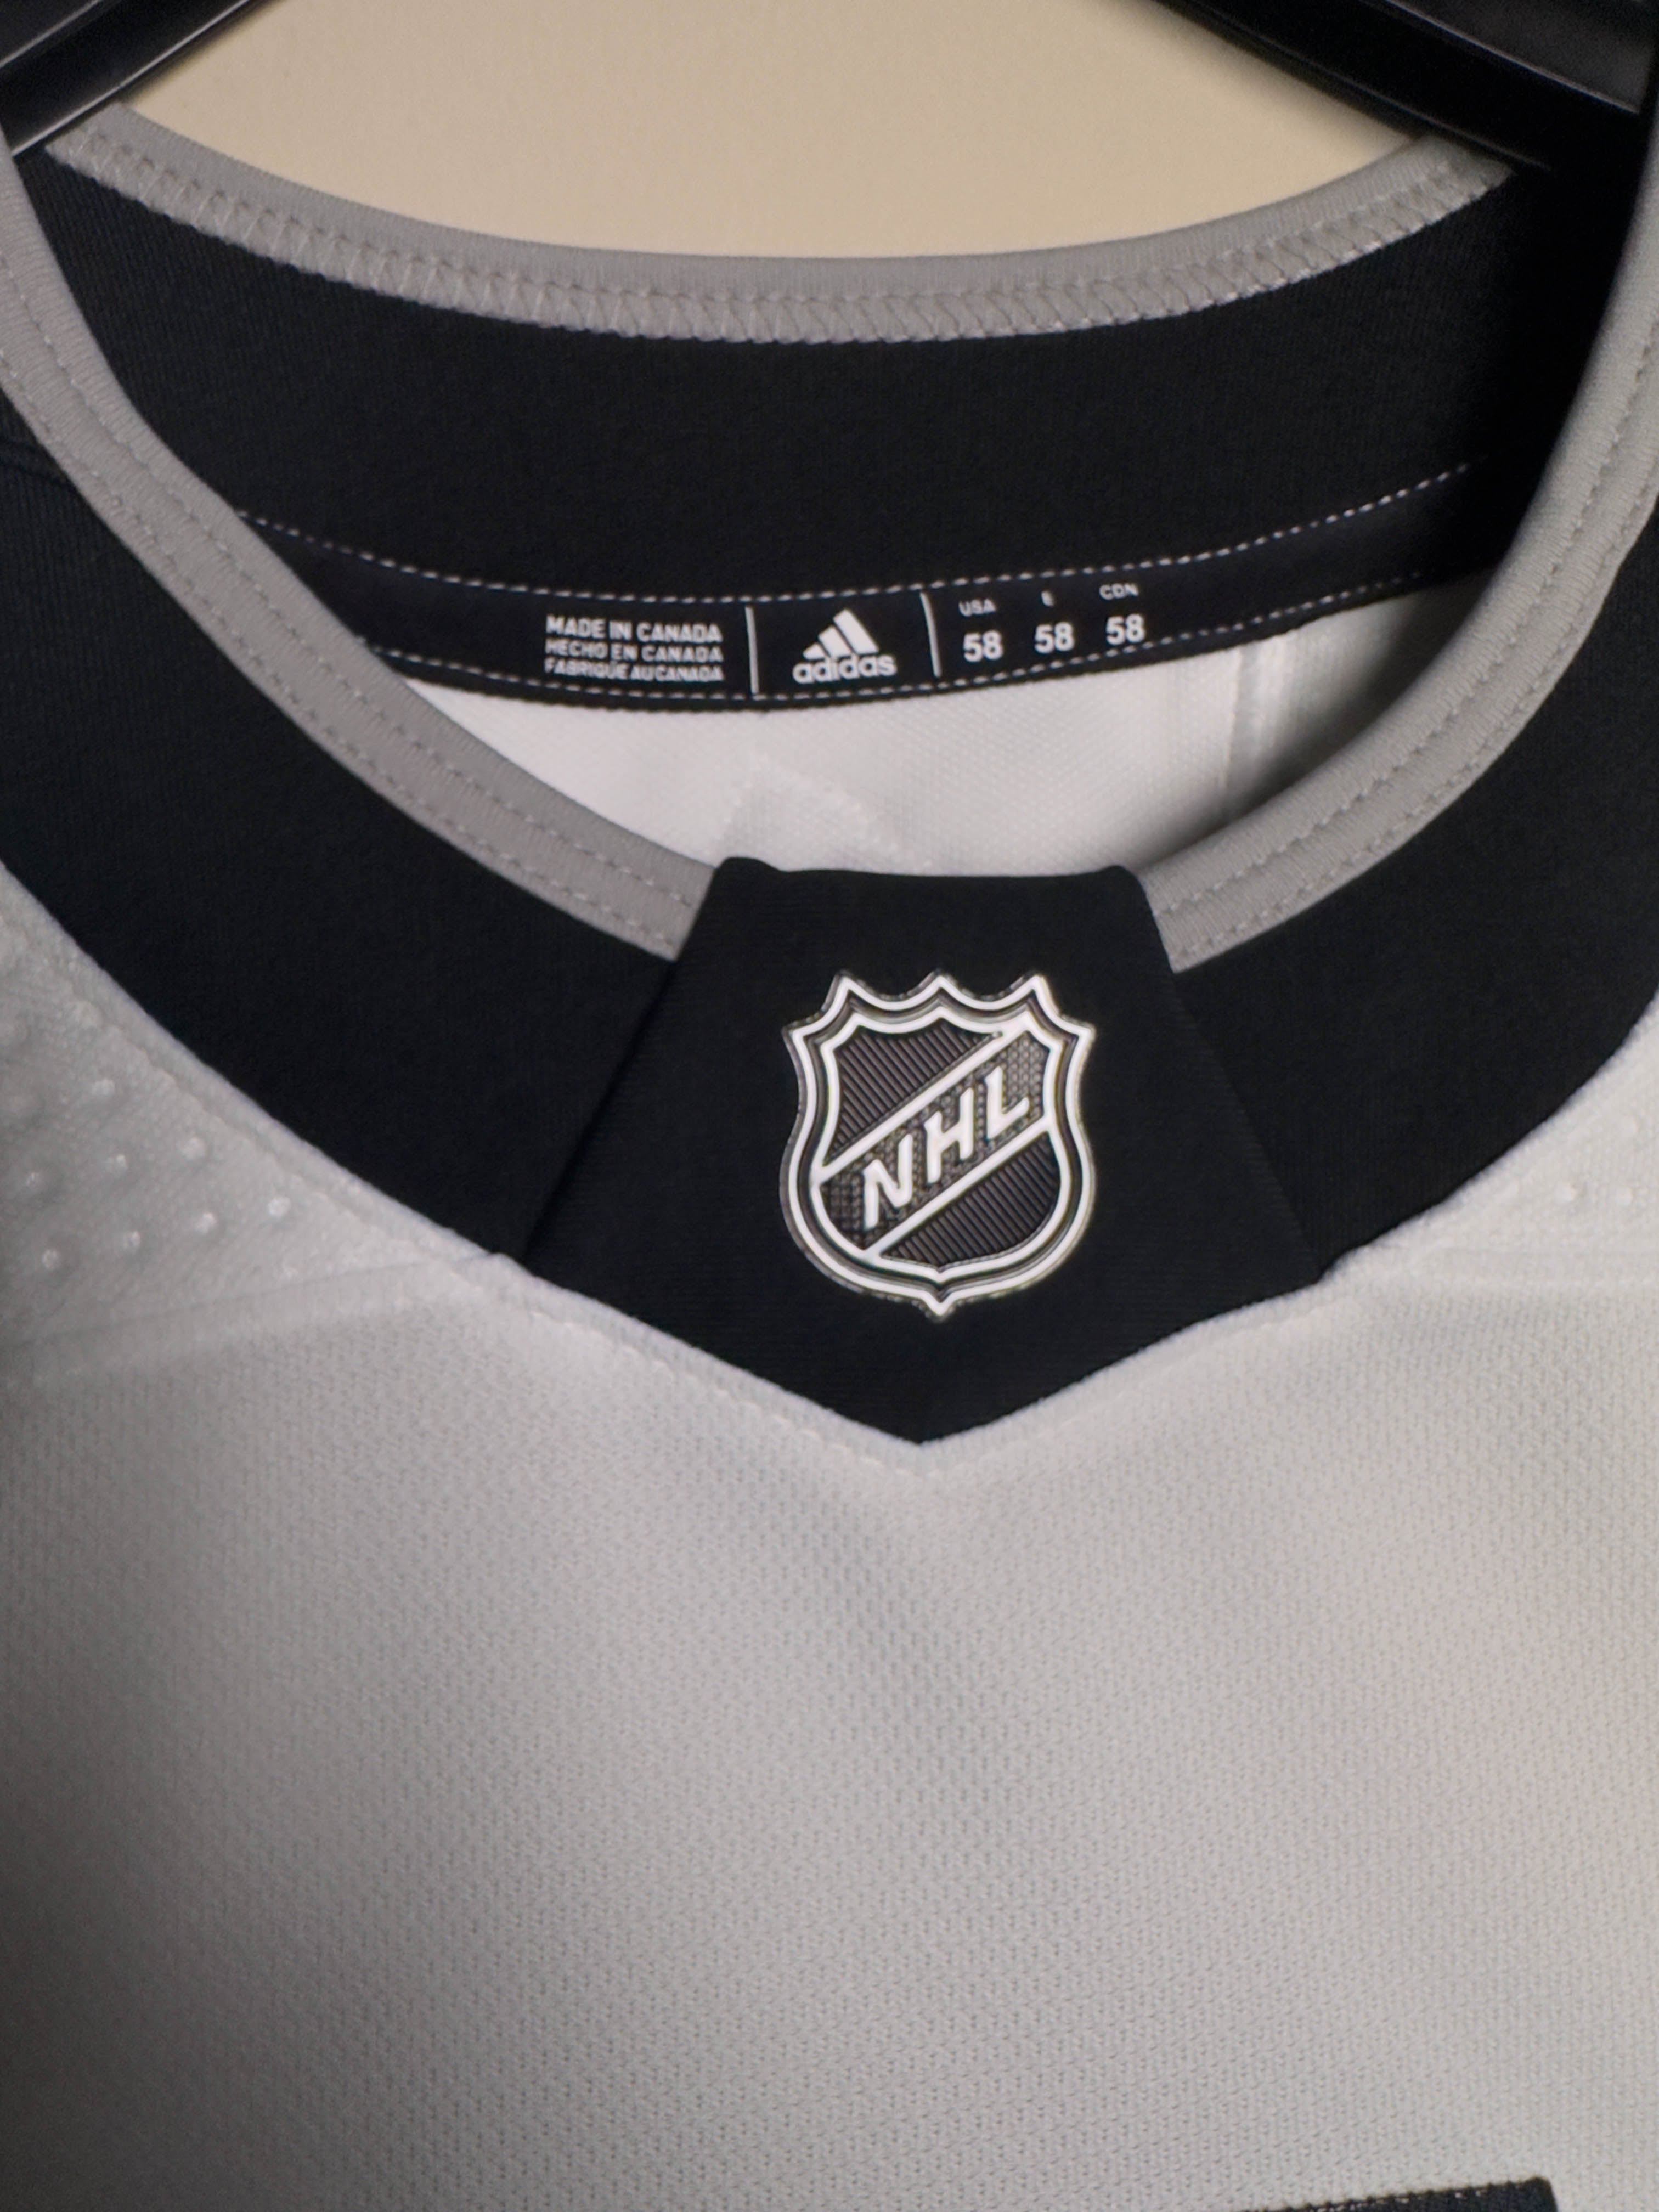 Los Angeles Kings NHL Adidas MiC Team Issued Alternate Jersey Size 58 (Player Size)